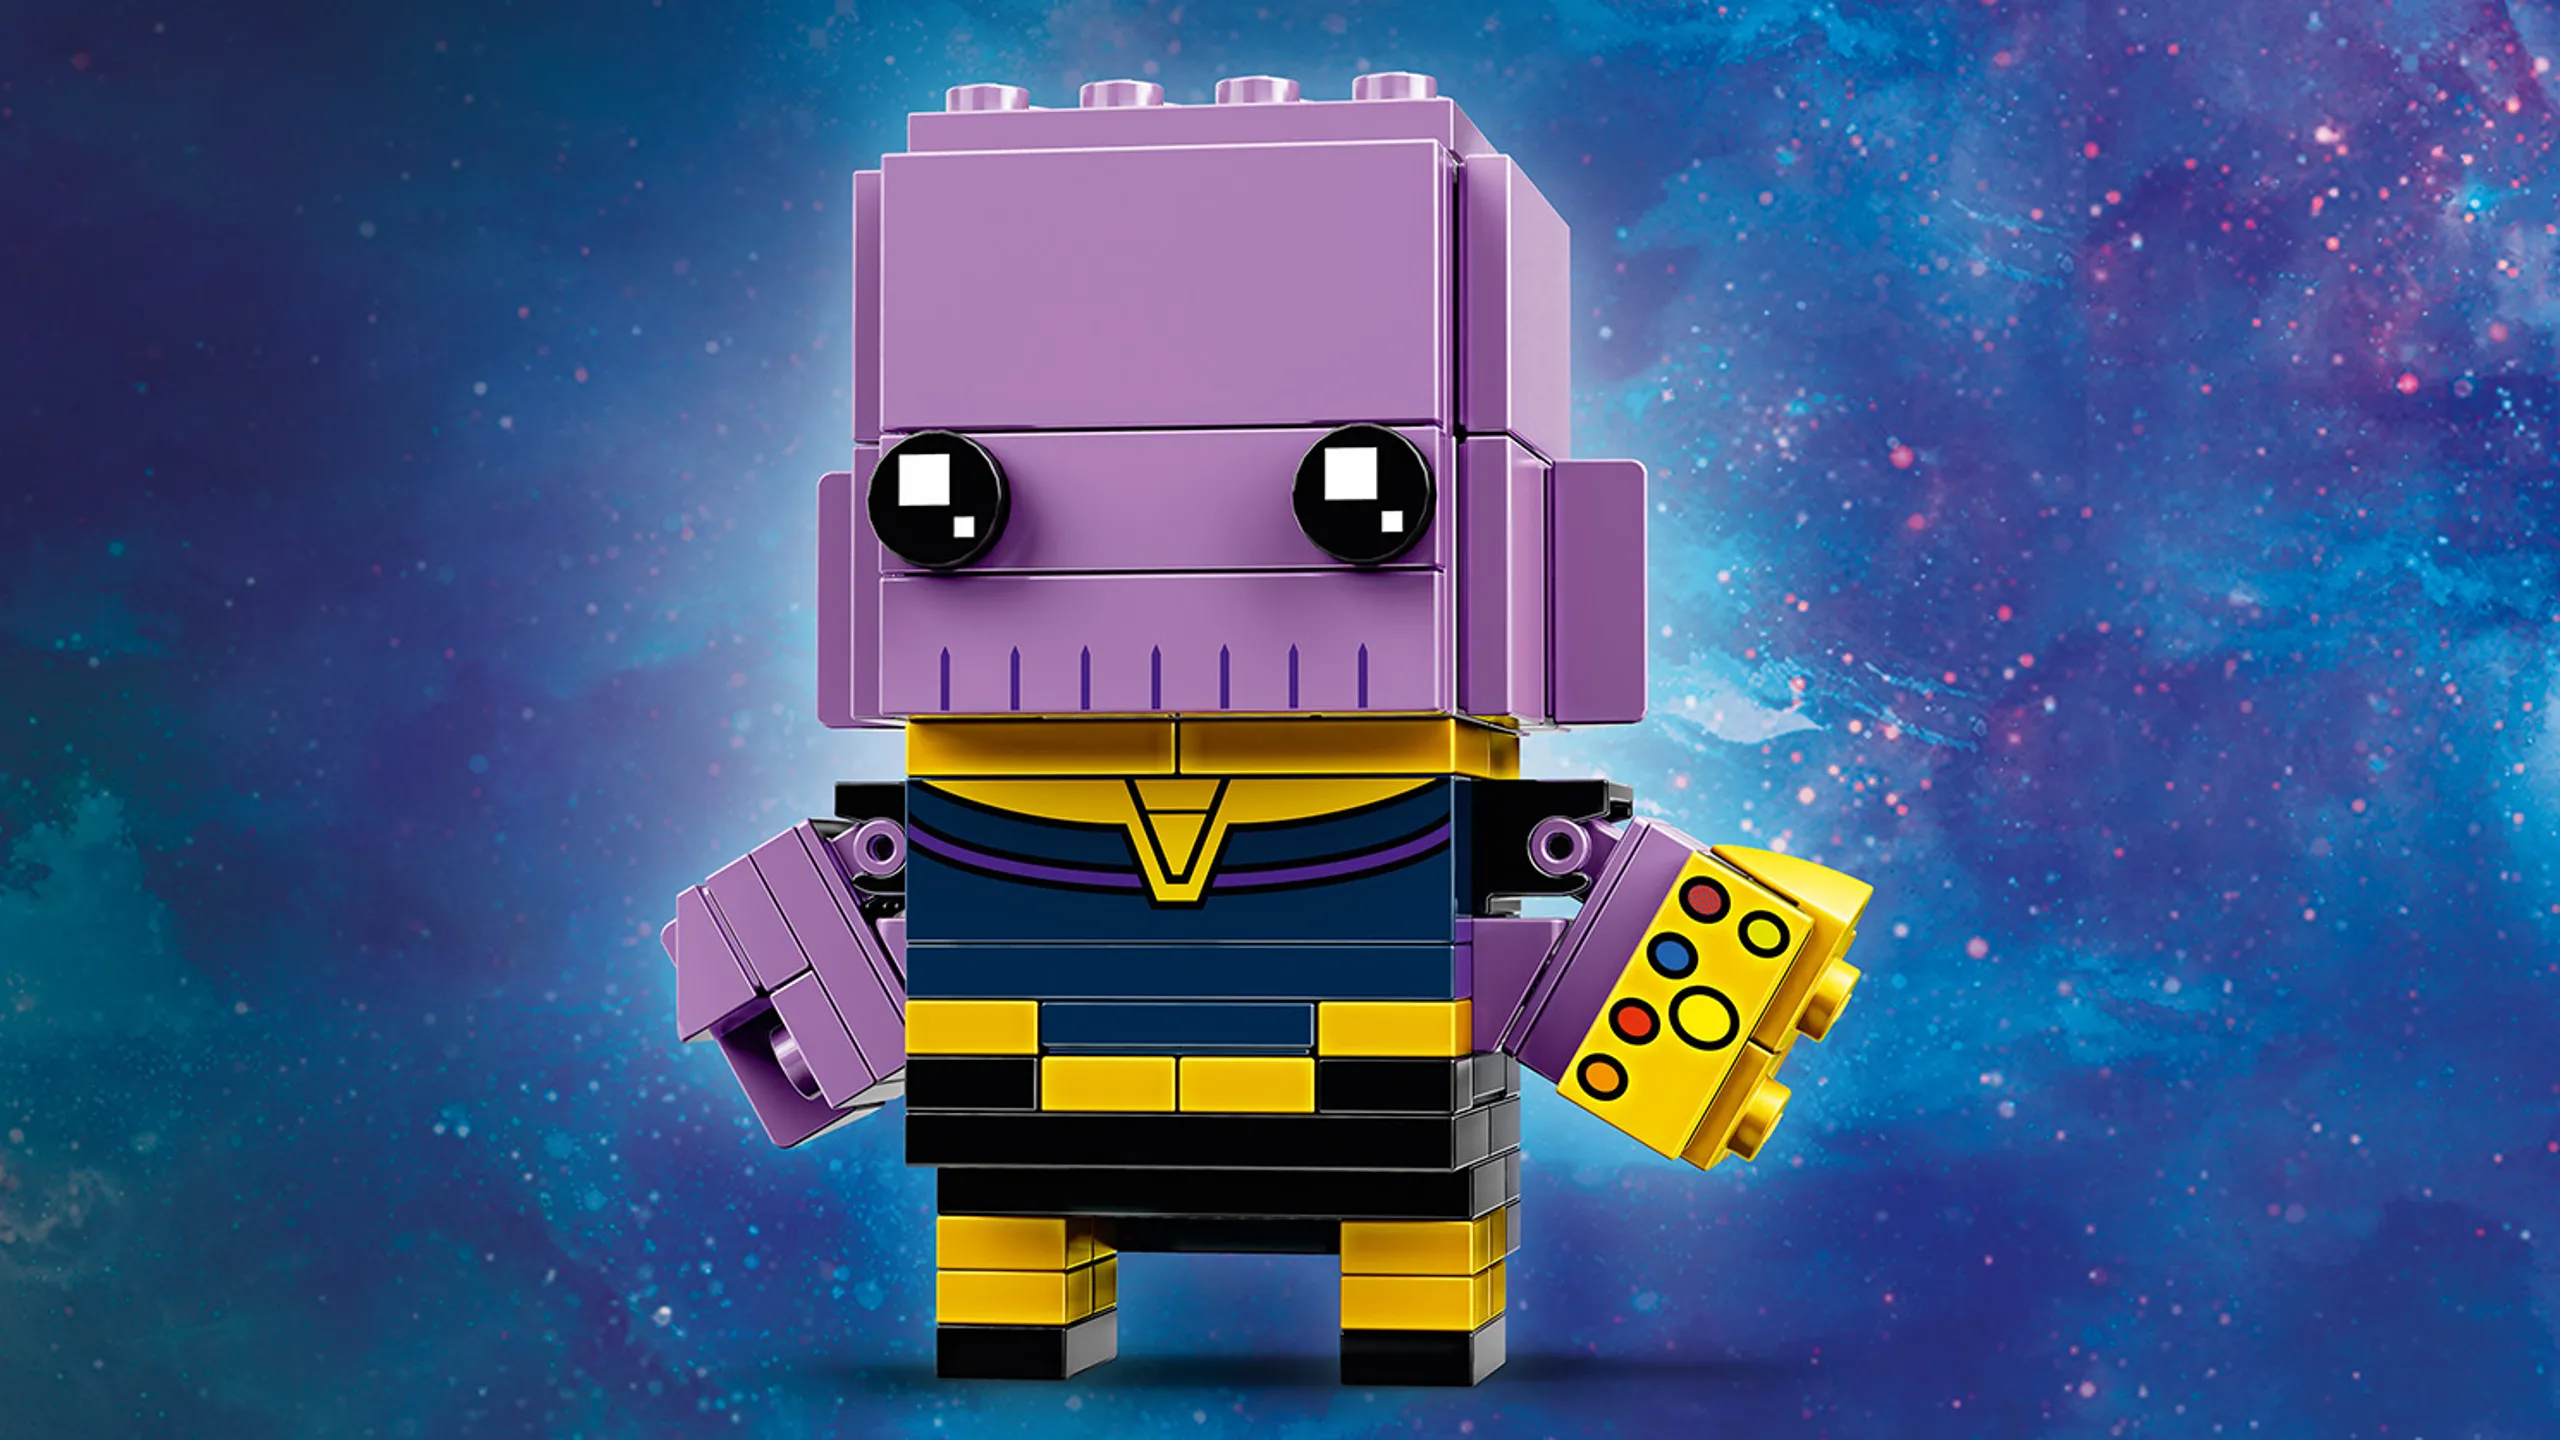 LEGO Brickheadz - 41605 Thanos - Build a LEGO Brickheadz figure of Thanos from the Avengers: Infinity War movie. Check out his purple skin and blue chest armor.